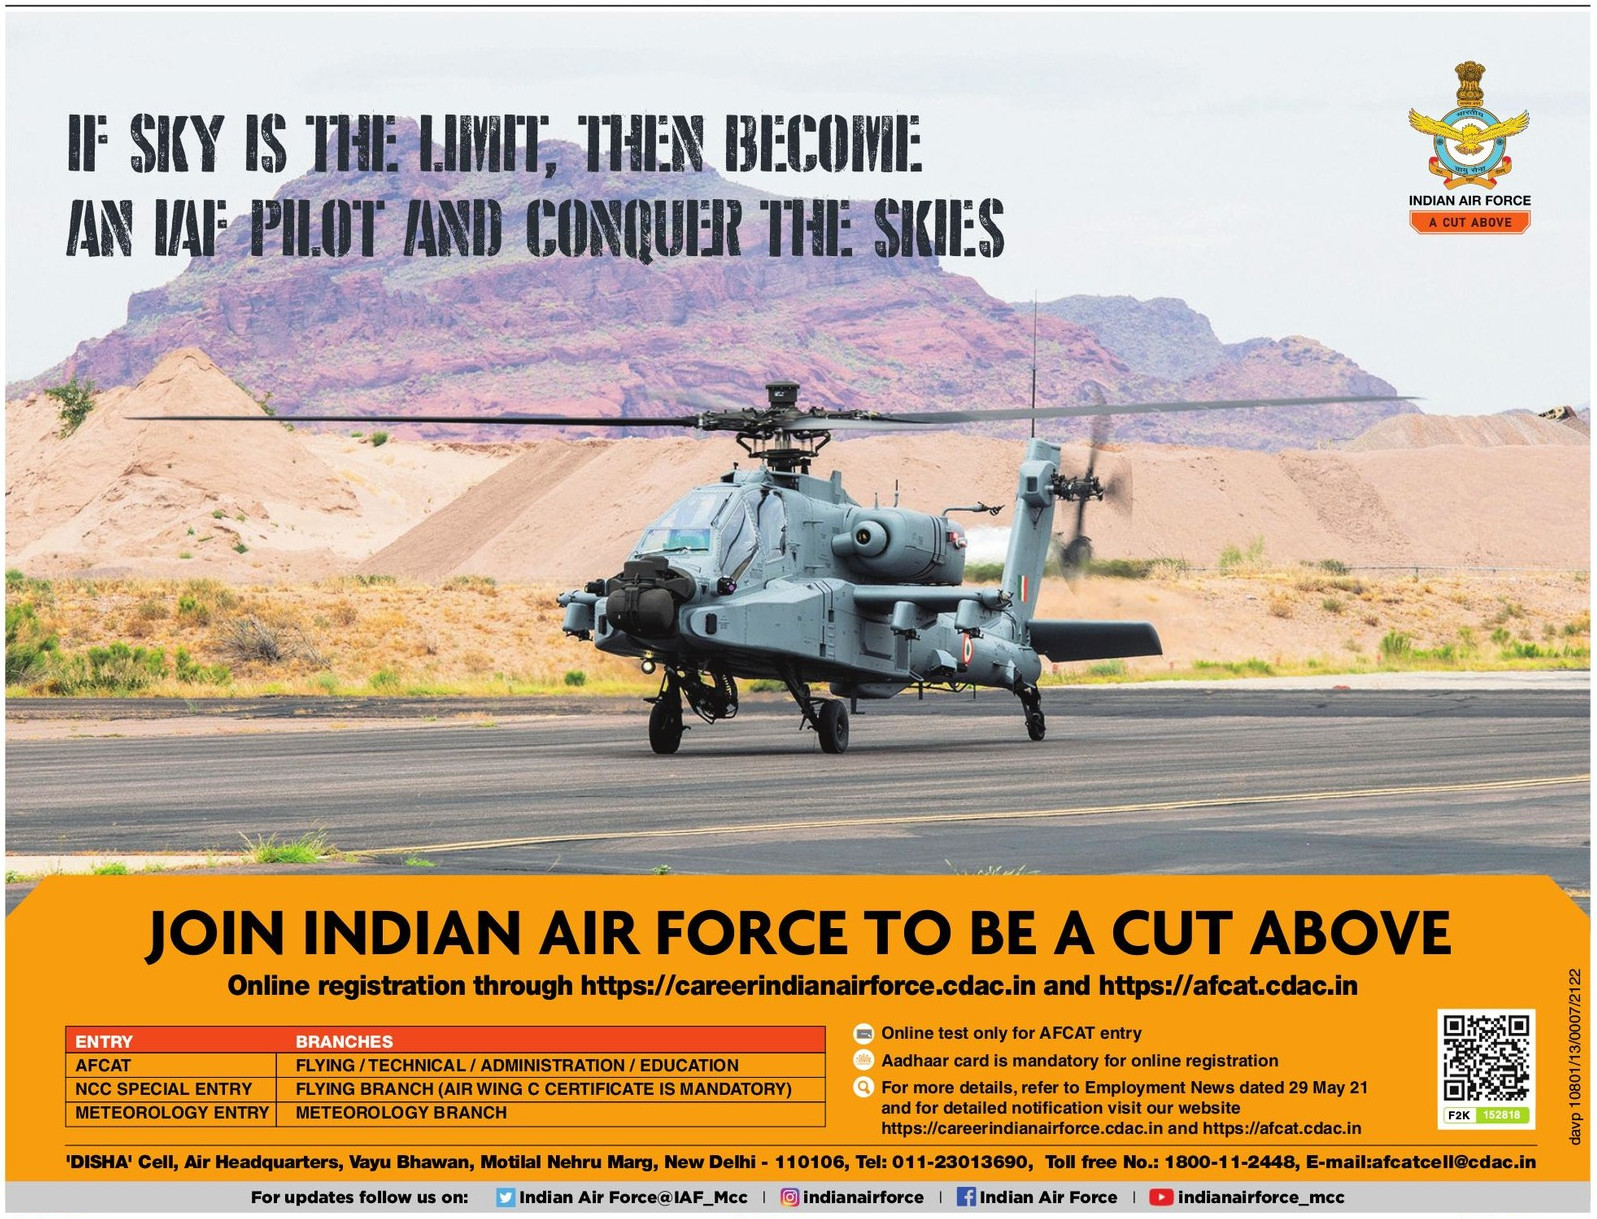 air-force-join-indian-air-force-to-be-a-cut-above-ad-amar-ujala-delhi-13-06-2021